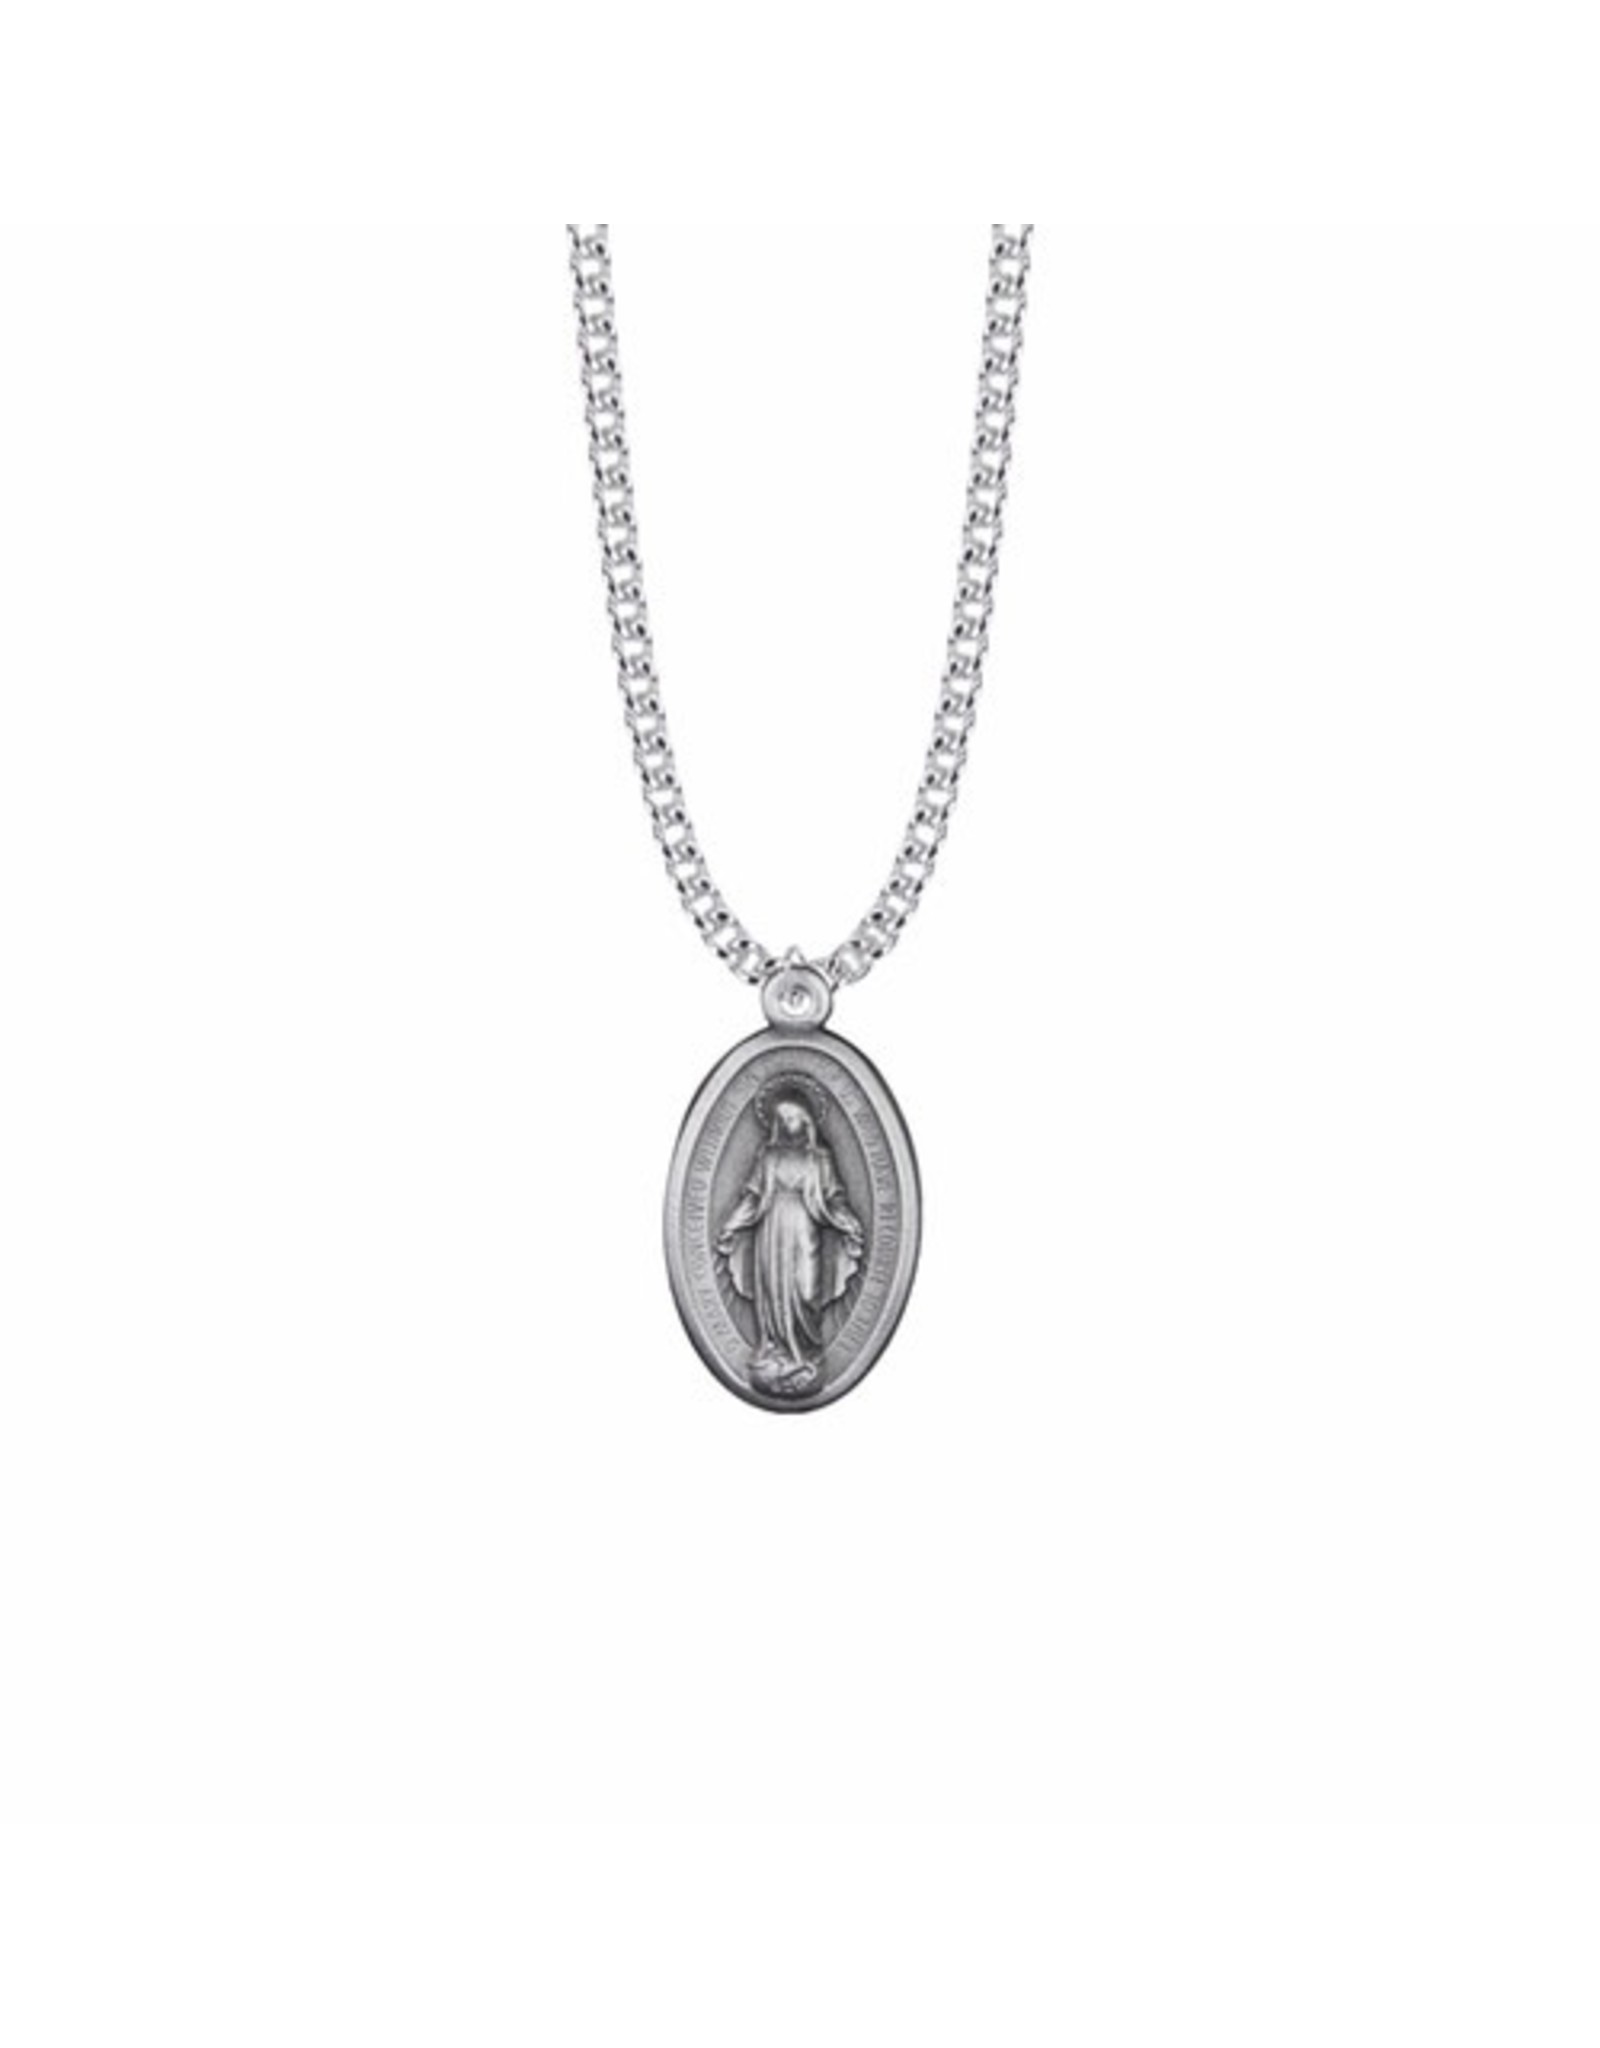 Singer Pewter Large Oval Miraculous Medal on 24" Chain